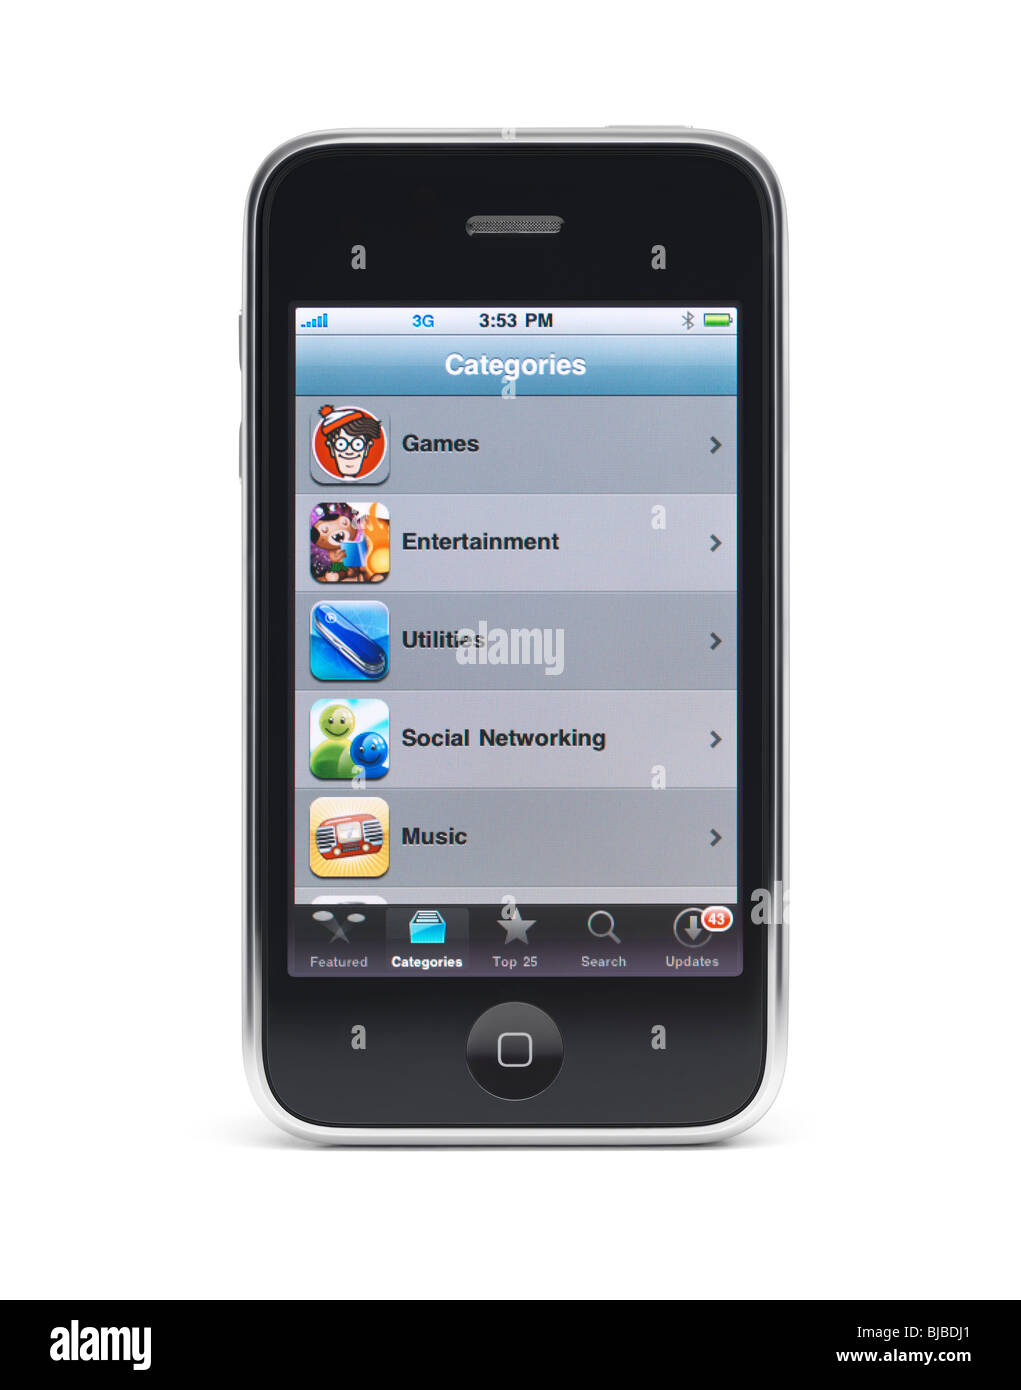 Apple iPhone 3Gs 3G smartphone displaying application menu on the screen isolated with clipping path on white background Stock Photo